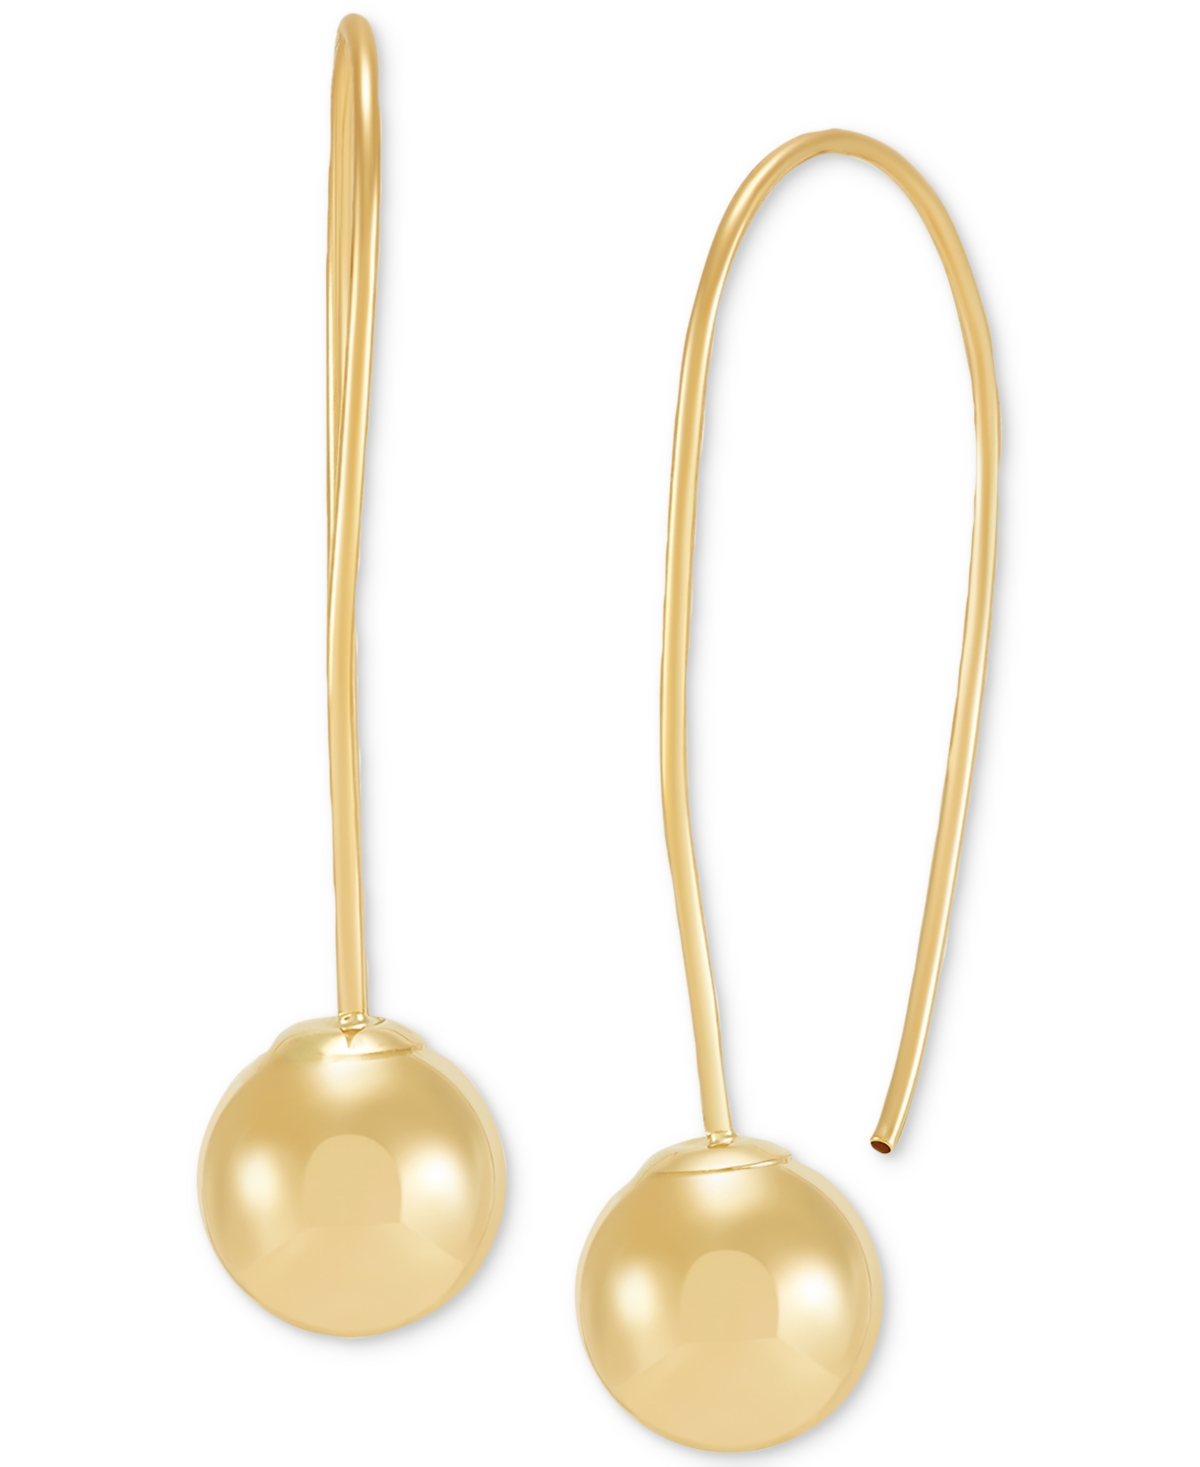 Polished Ball Fish Hook Wire Drop Earrings in 14k Gold - Gold